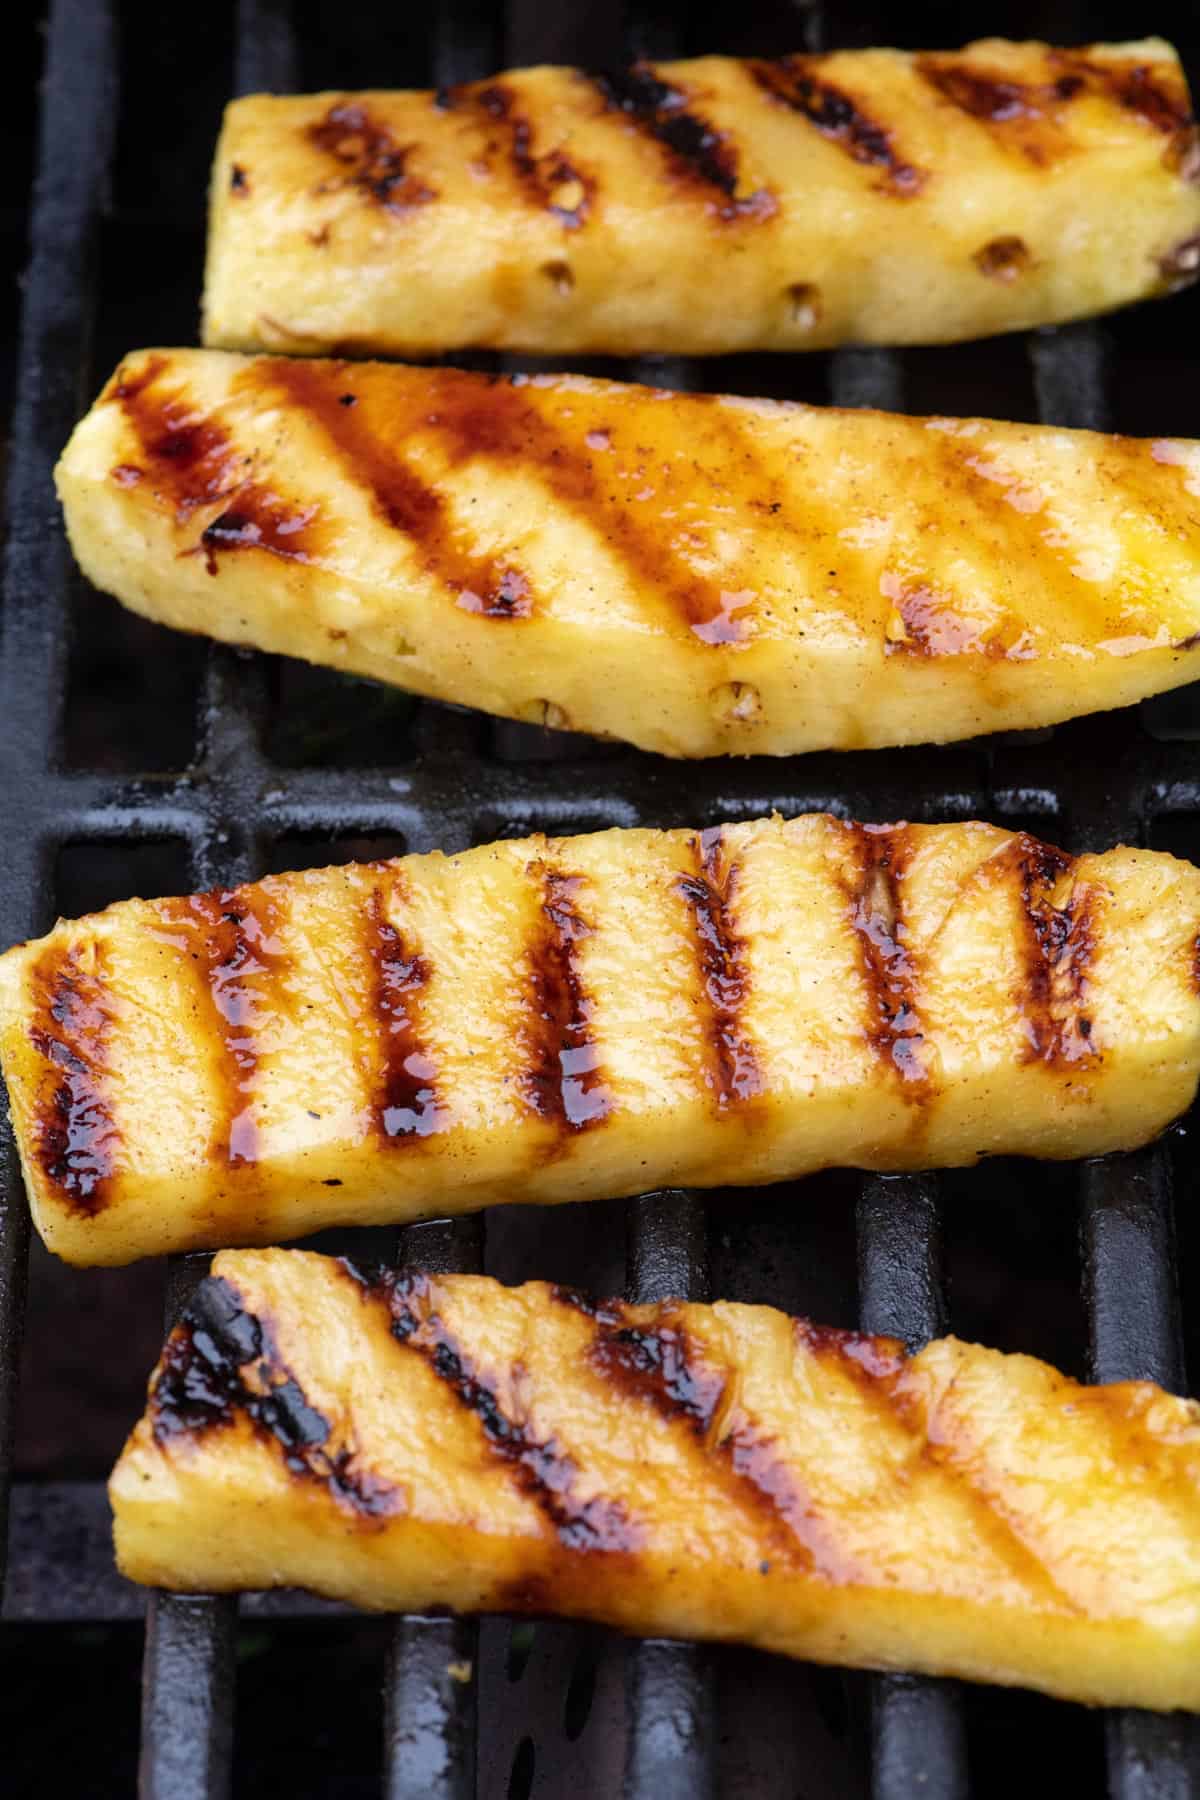 Pineapple spears on a grill with caramelized grill marks.